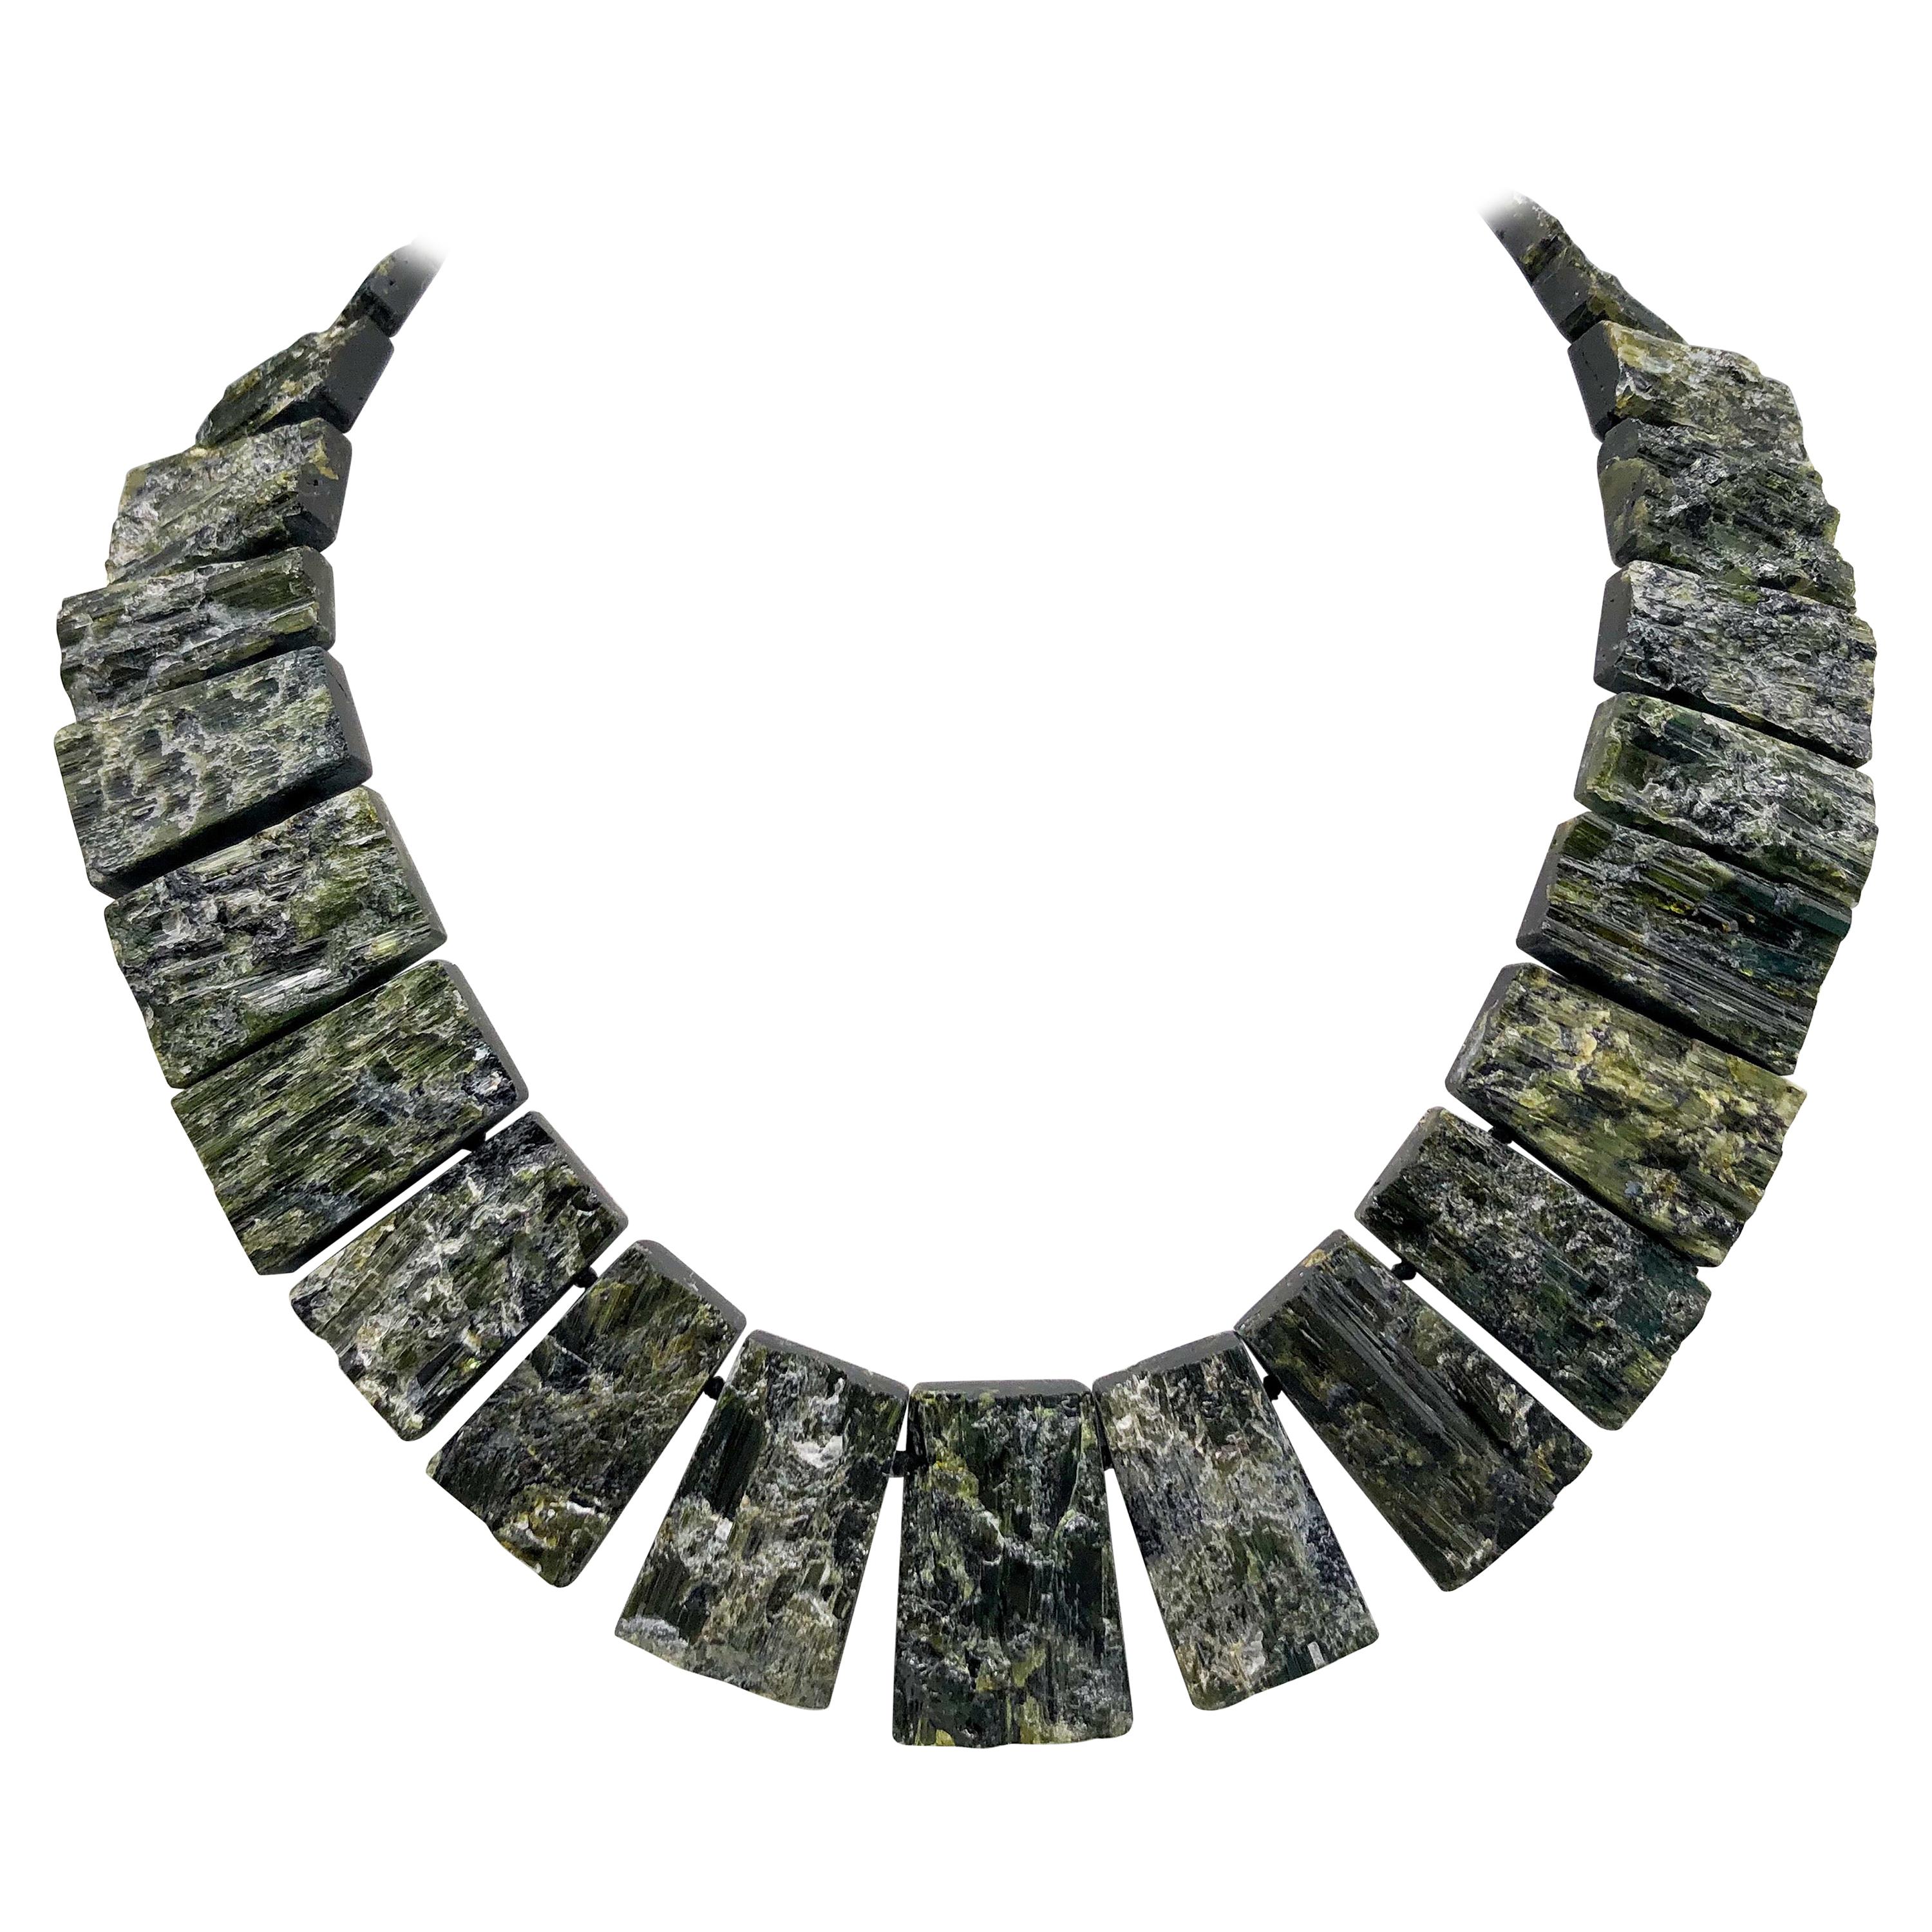 A.Jeschel Black Tourmaline—The most powerful stone of all in a matched collar 